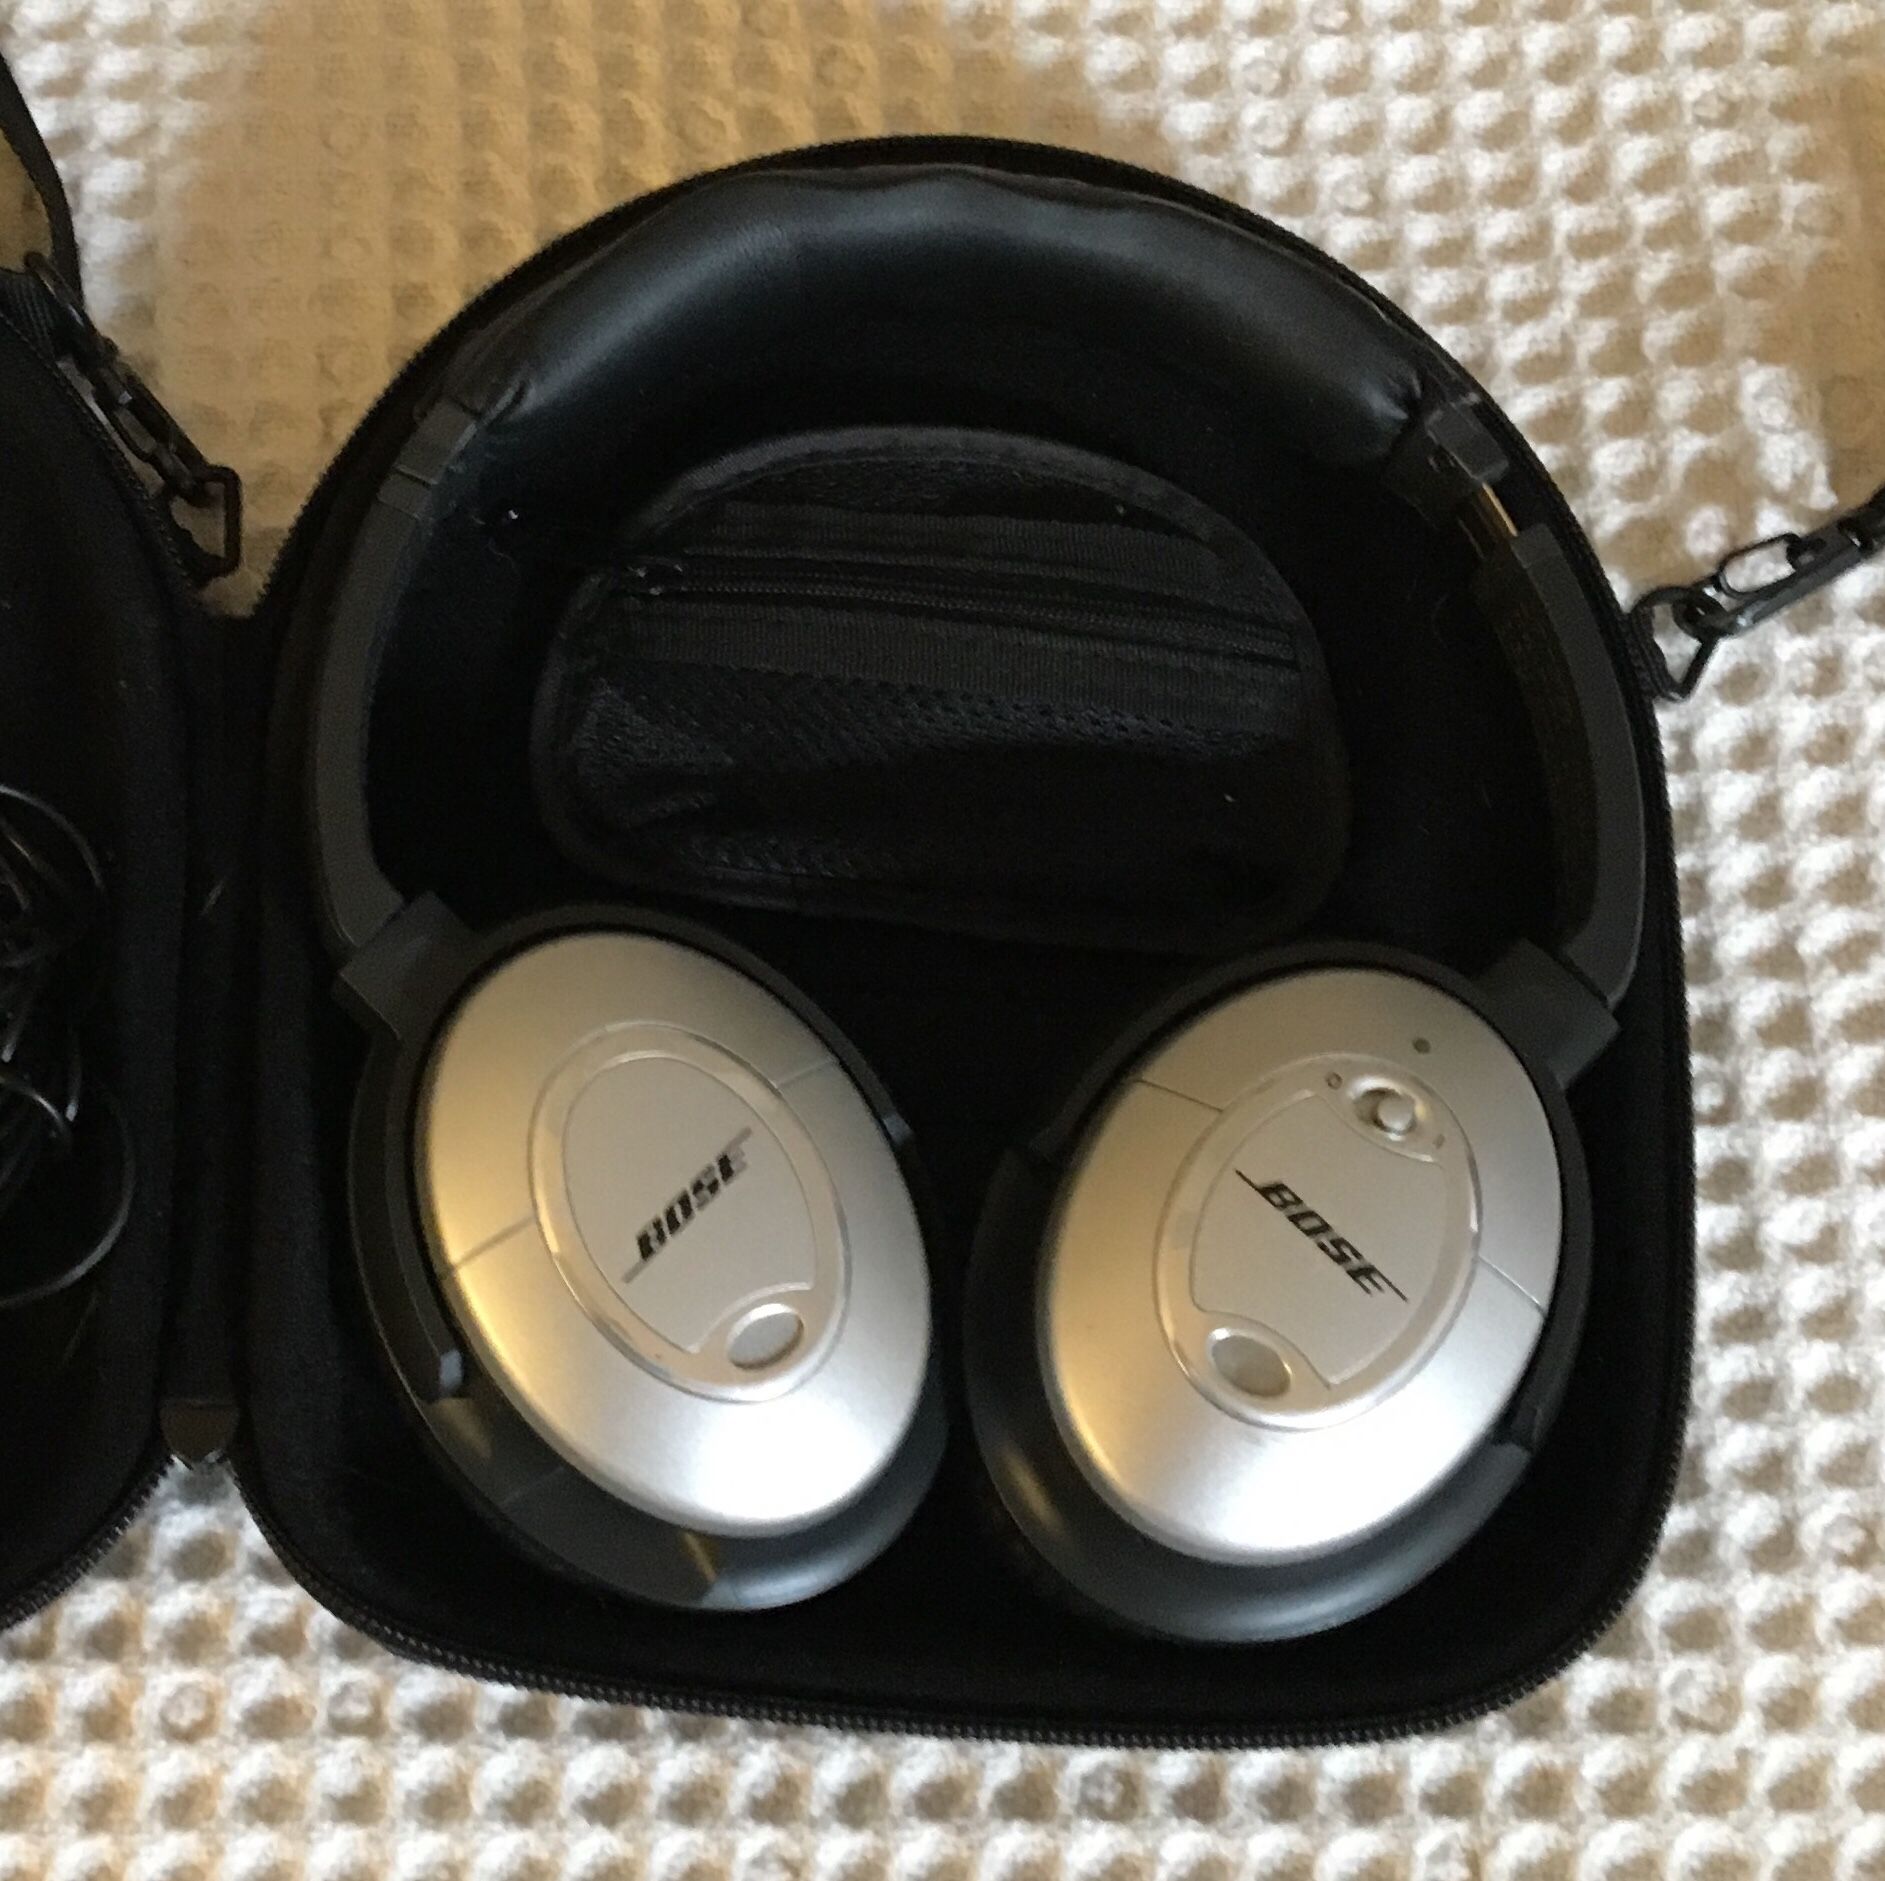 Bose QuietComfort Noise Canceling Headset with case - new ear pads and padding